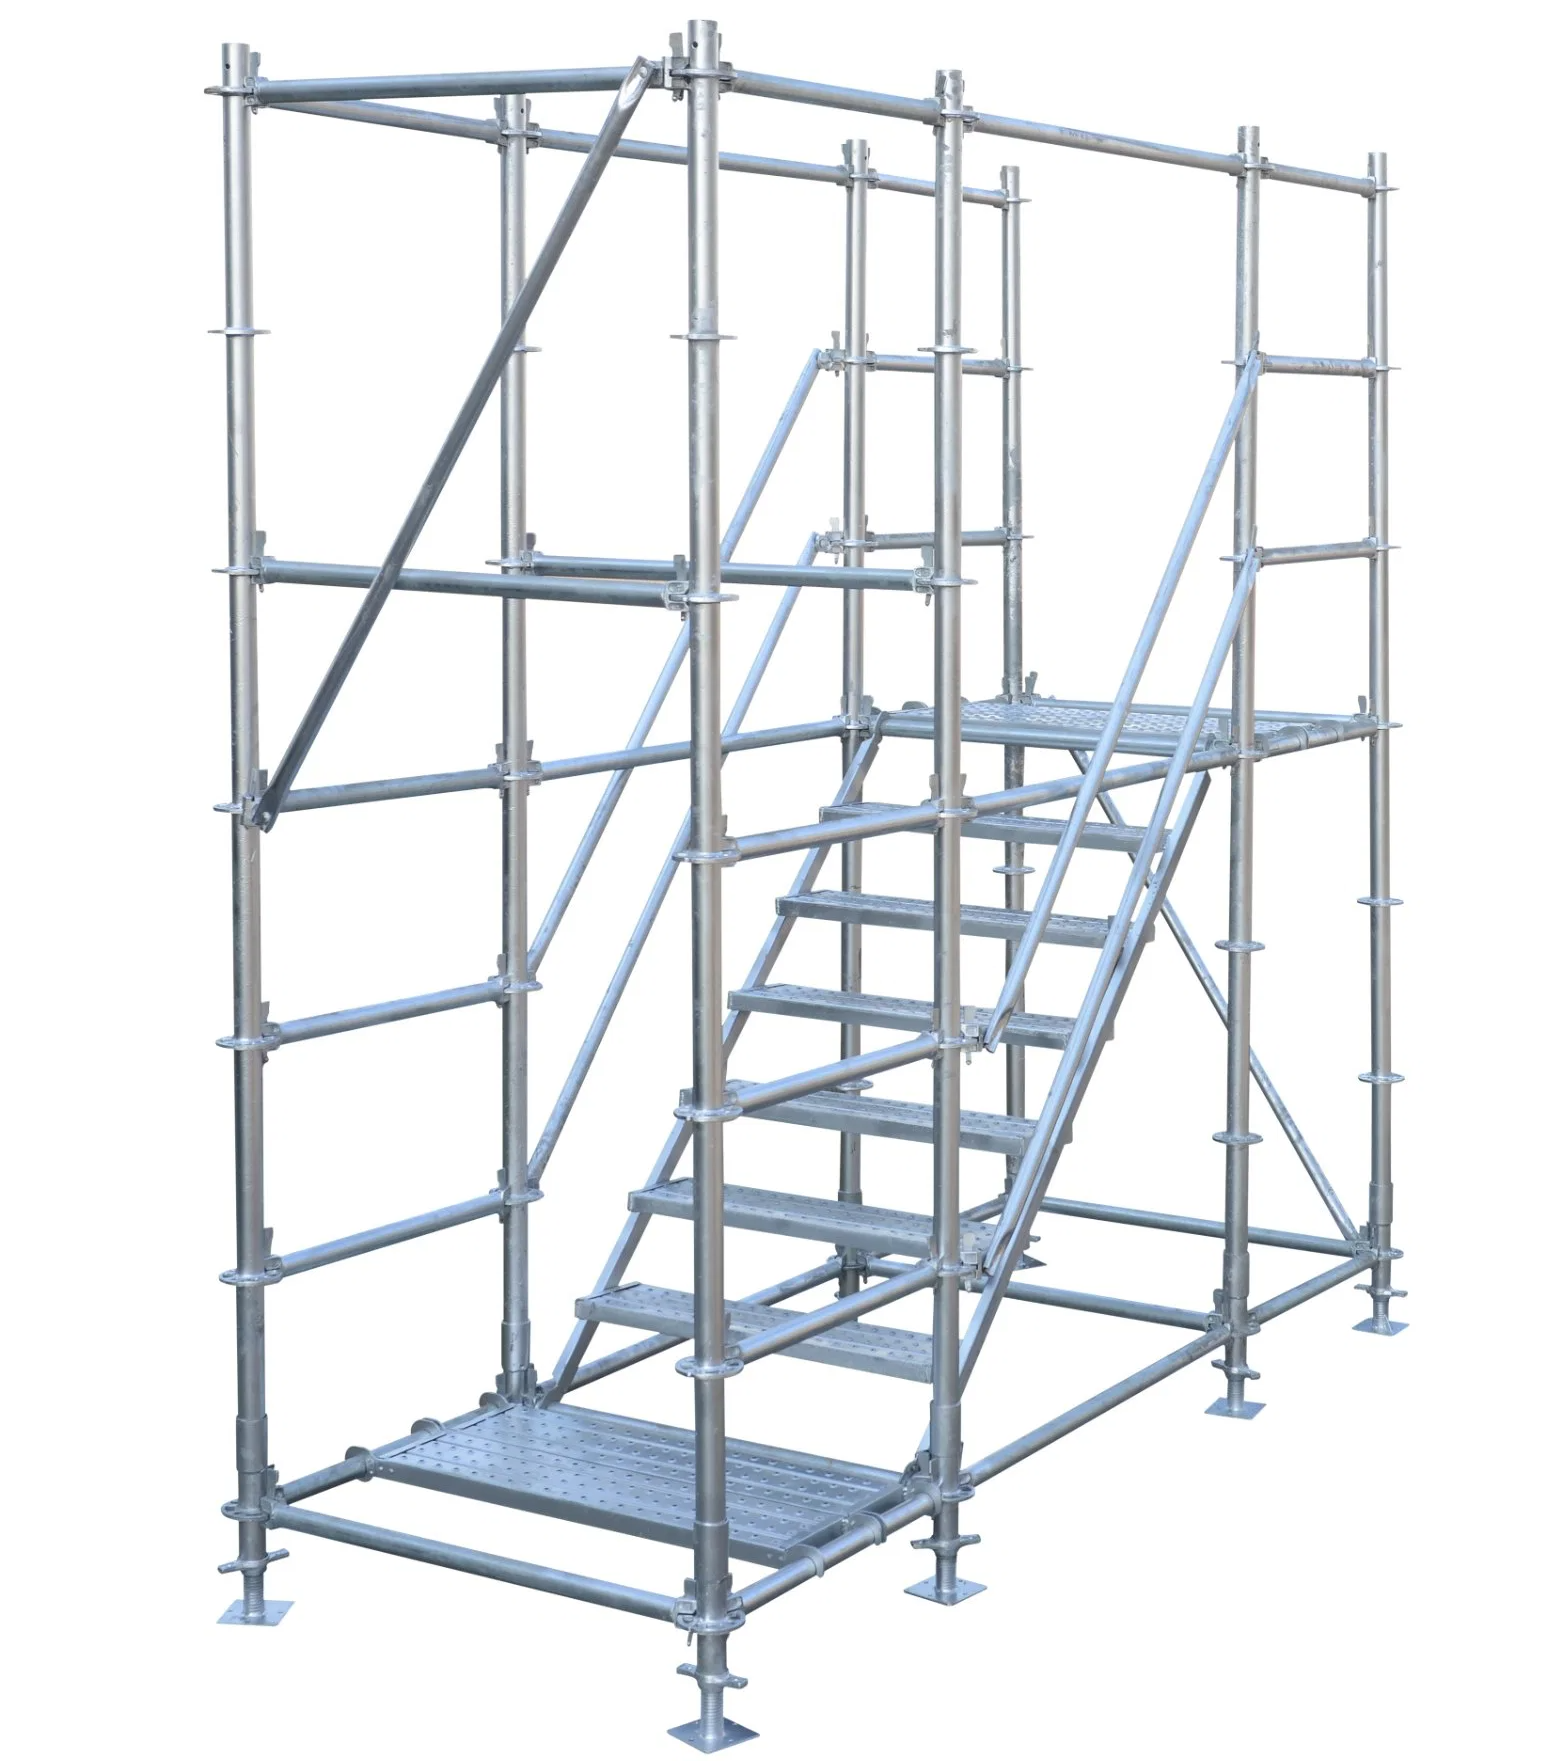 ringlock scaffolding components